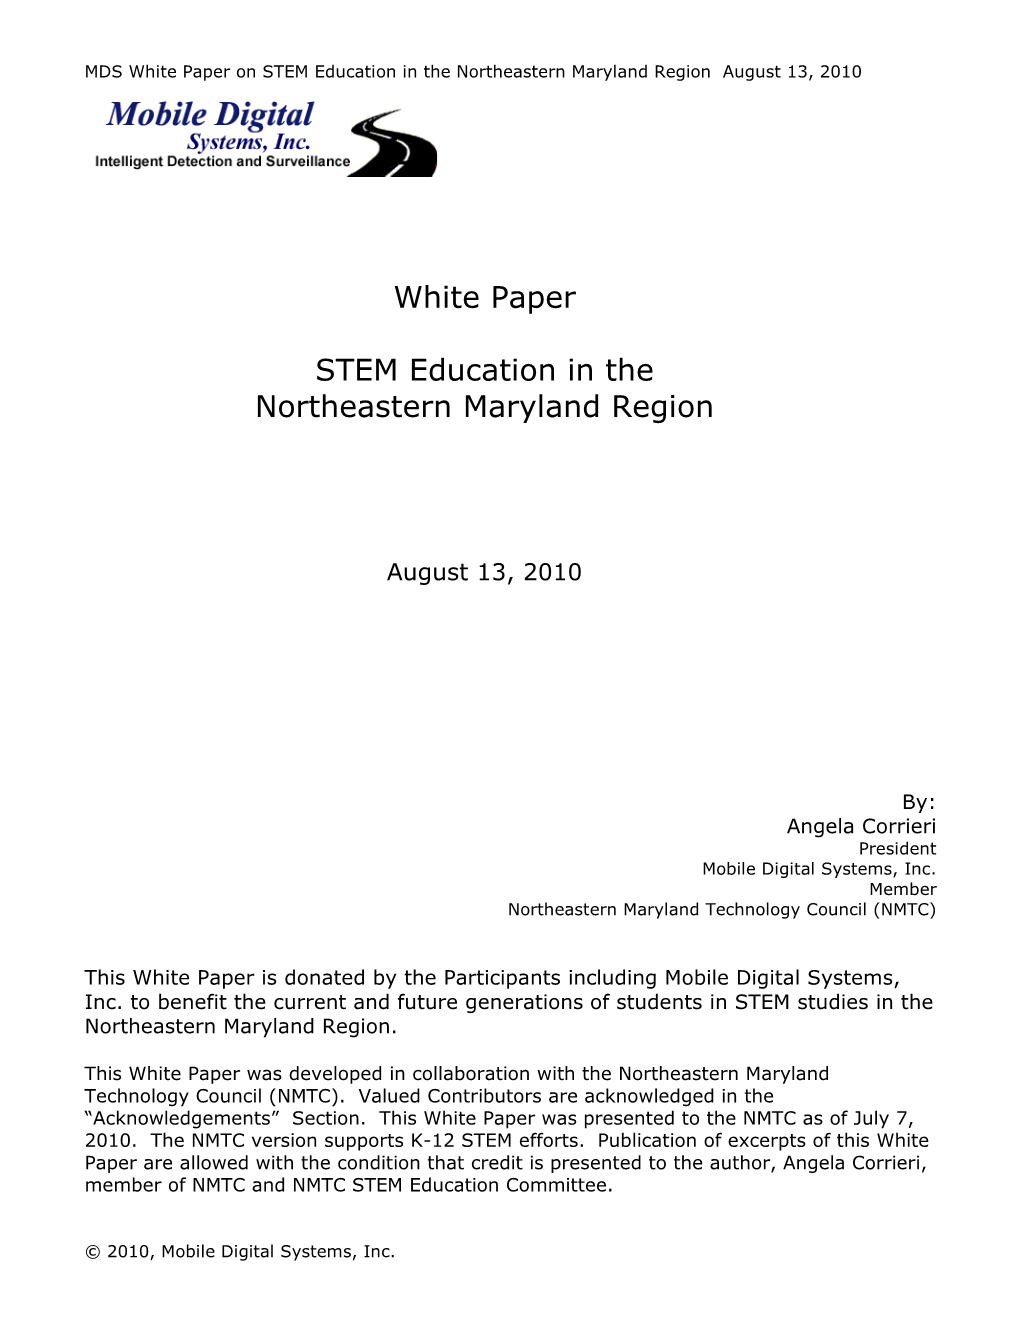 White Paper STEM Education in the Northeastern Maryland Region